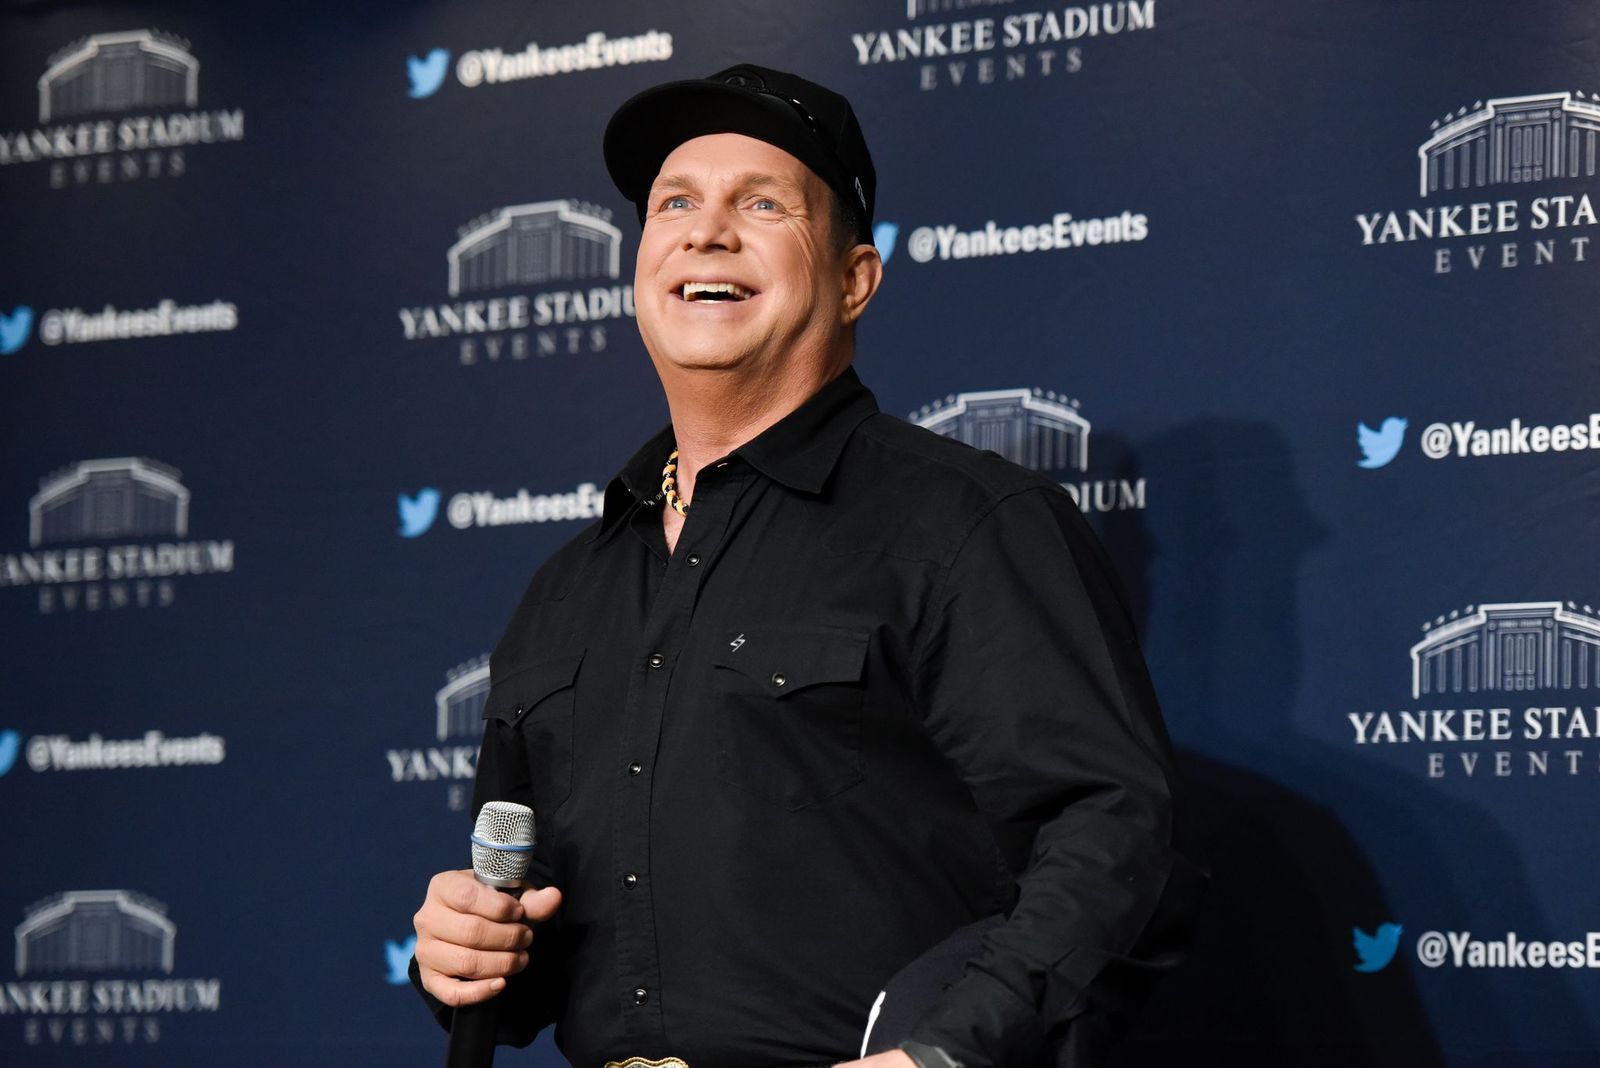 Garth Brooks at his New York Press Conference held at Yankee Stadium on May 17, 2016 | Photo: Matthew Eisman/Getty Images